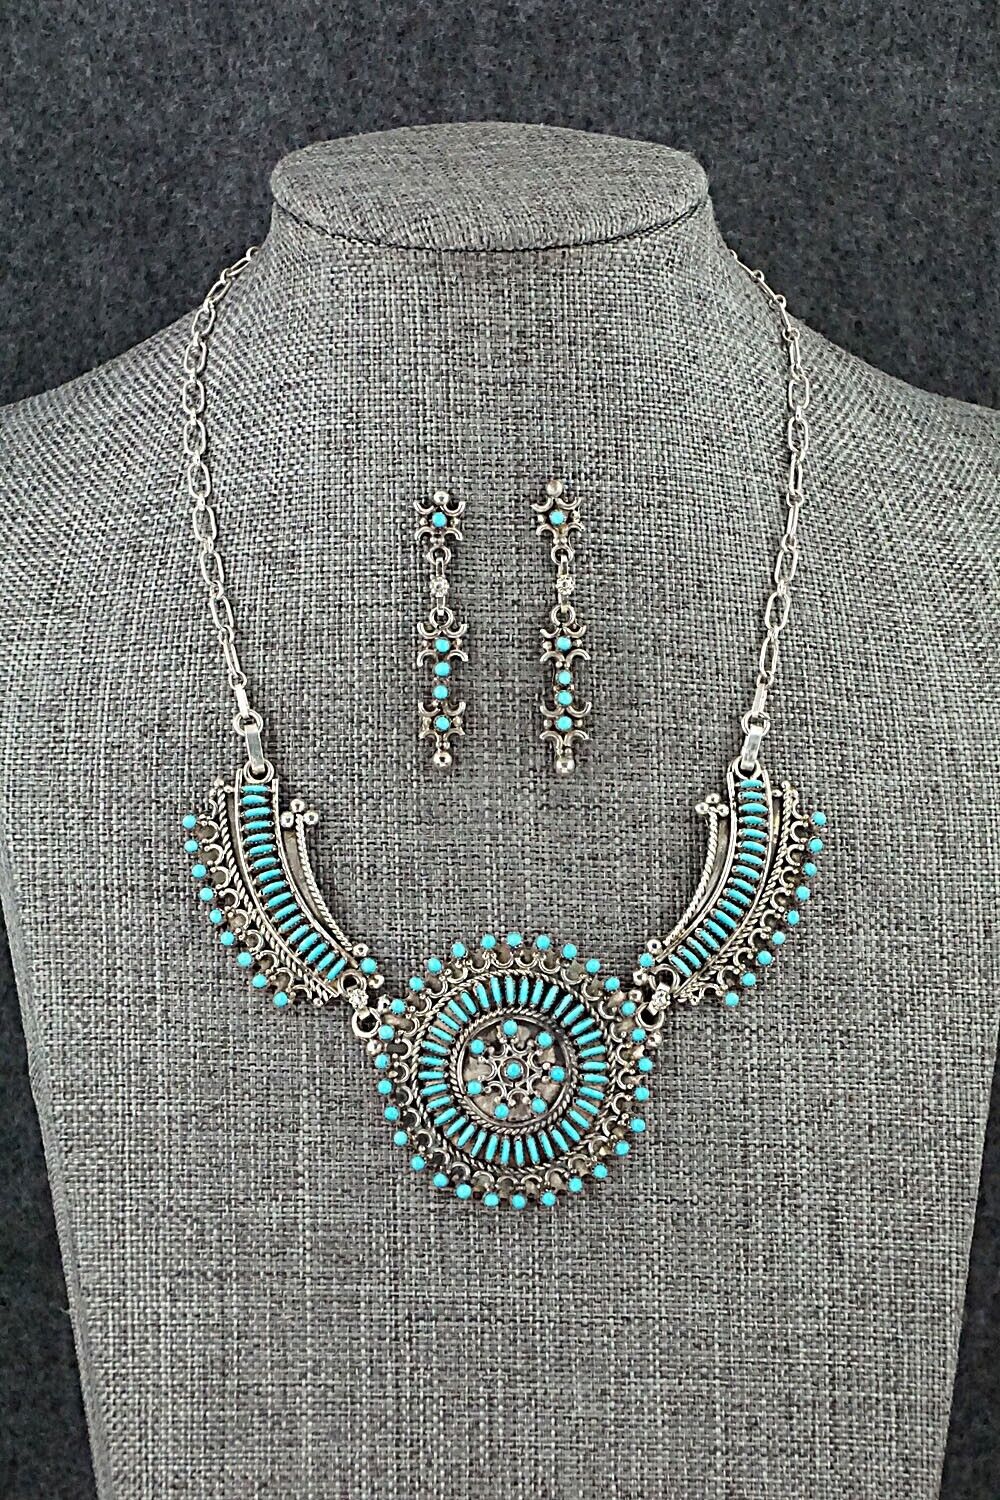 Turquoise & Sterling Silver Necklace Set - Connie Wyaco